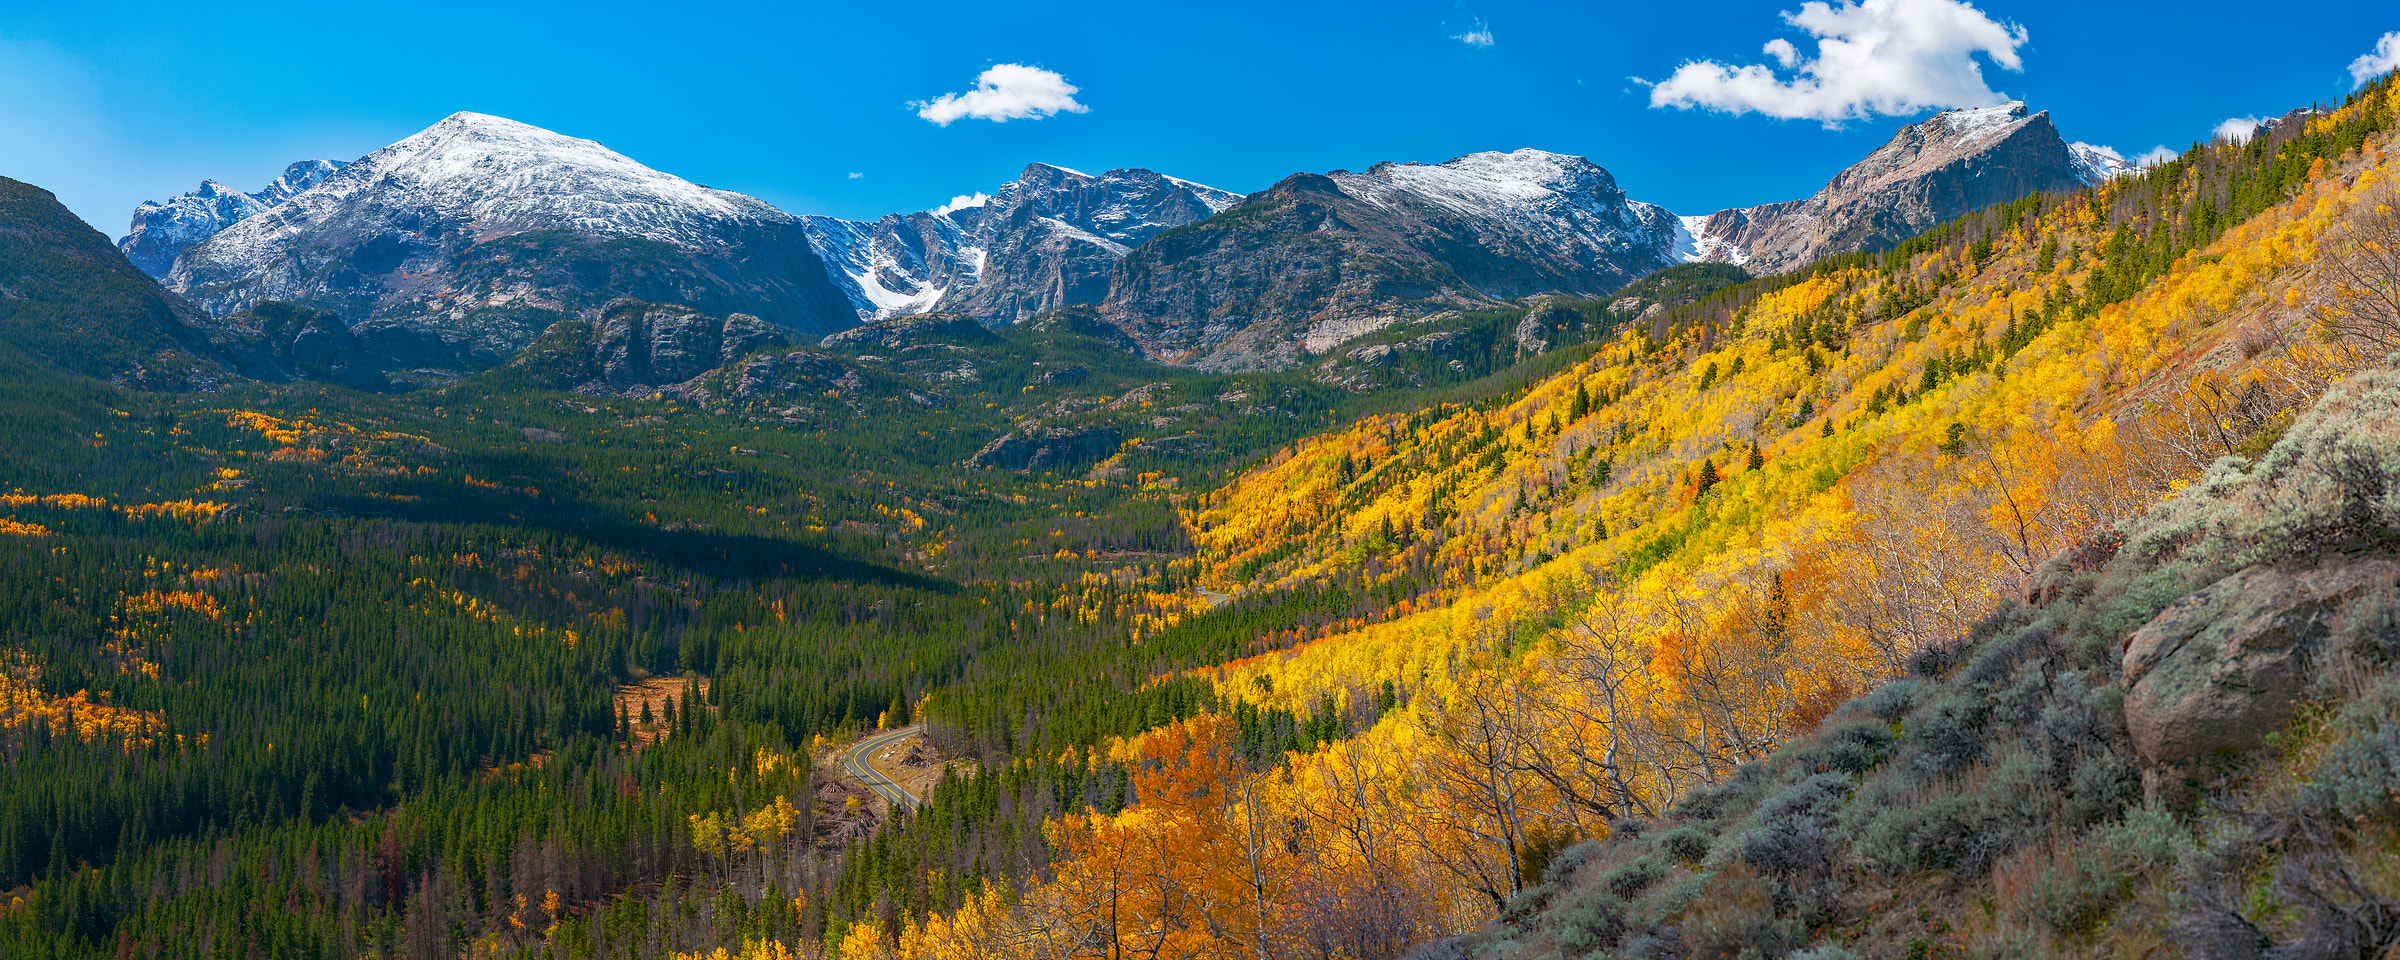 281 megapixels! A very high resolution, large-format VAST photo print of a valley with autumn foliage and snow-covered mountains in the background; landscape photograph created by John Freeman in Bear Lake Road, Rocky Mountain National Park, Colorado.